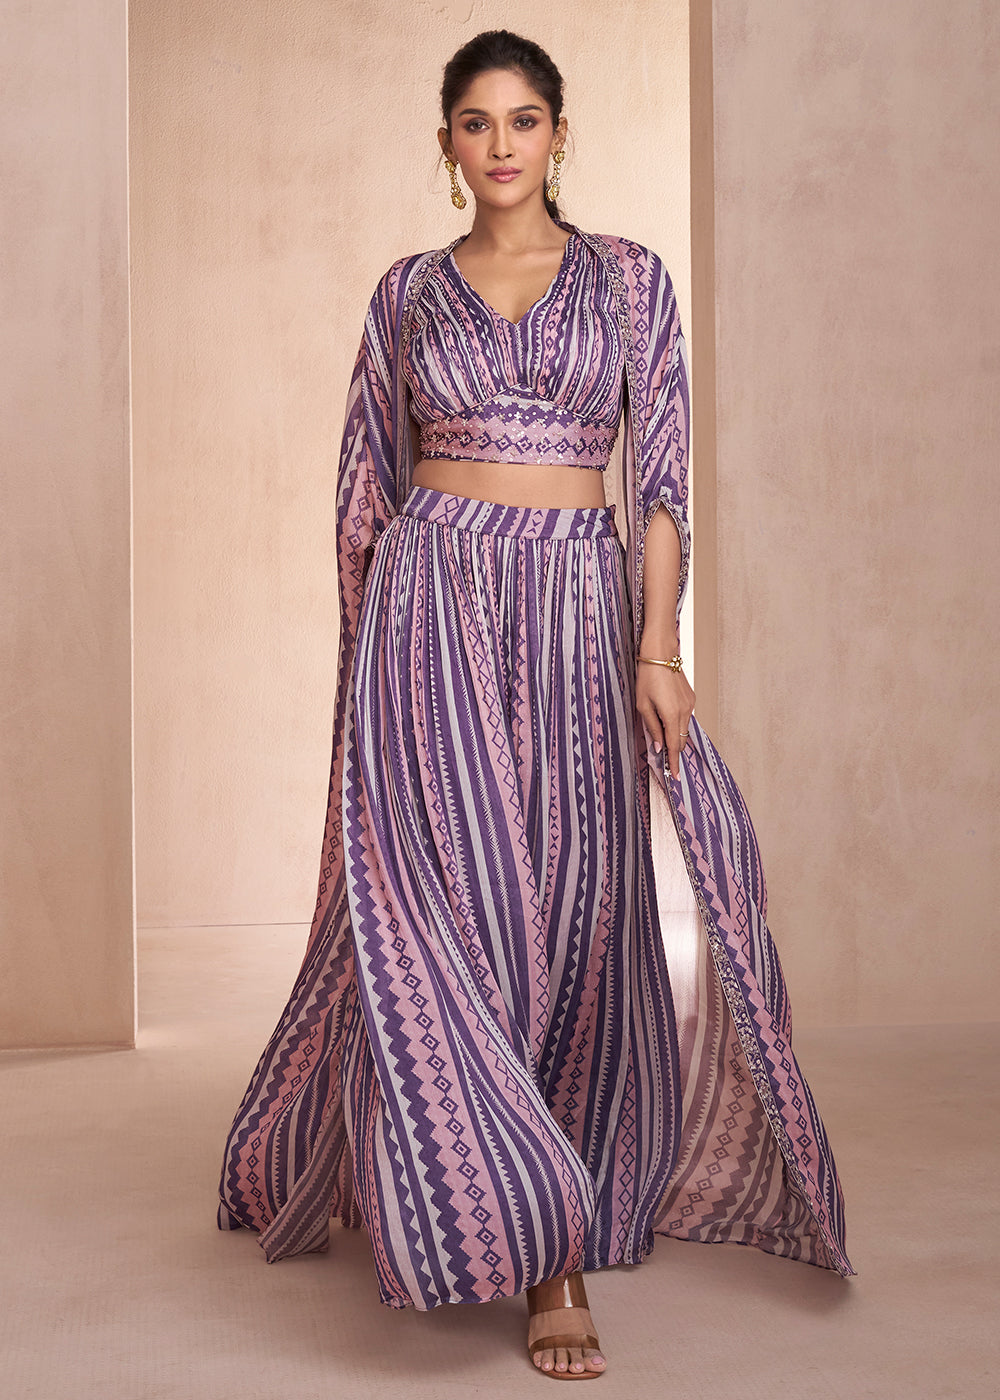 Buy Now Indo Western Style Multicolor Party Wear Palazzo Suit Online in USA, UK, Canada, Germany, Australia & Worldwide at Empress Clothing. 